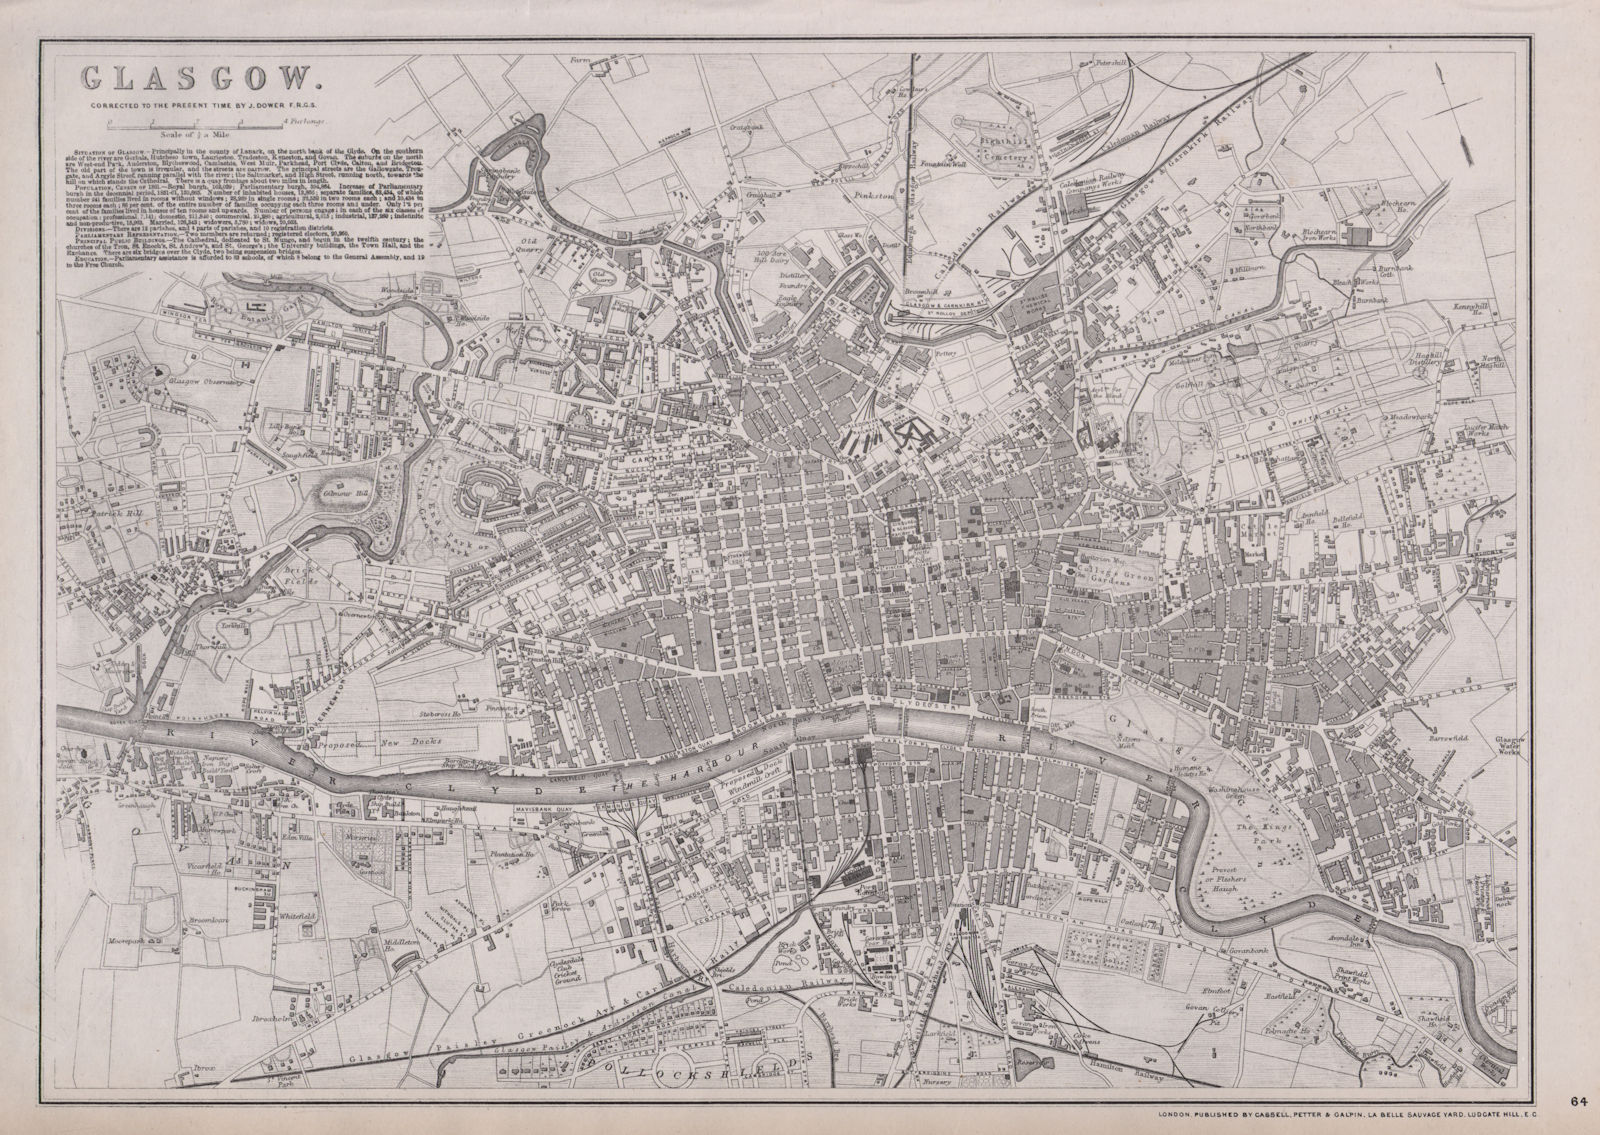 GLASGOW. Large town/city plan by EDWARD WELLER for the Dispatch Atlas 1868 map